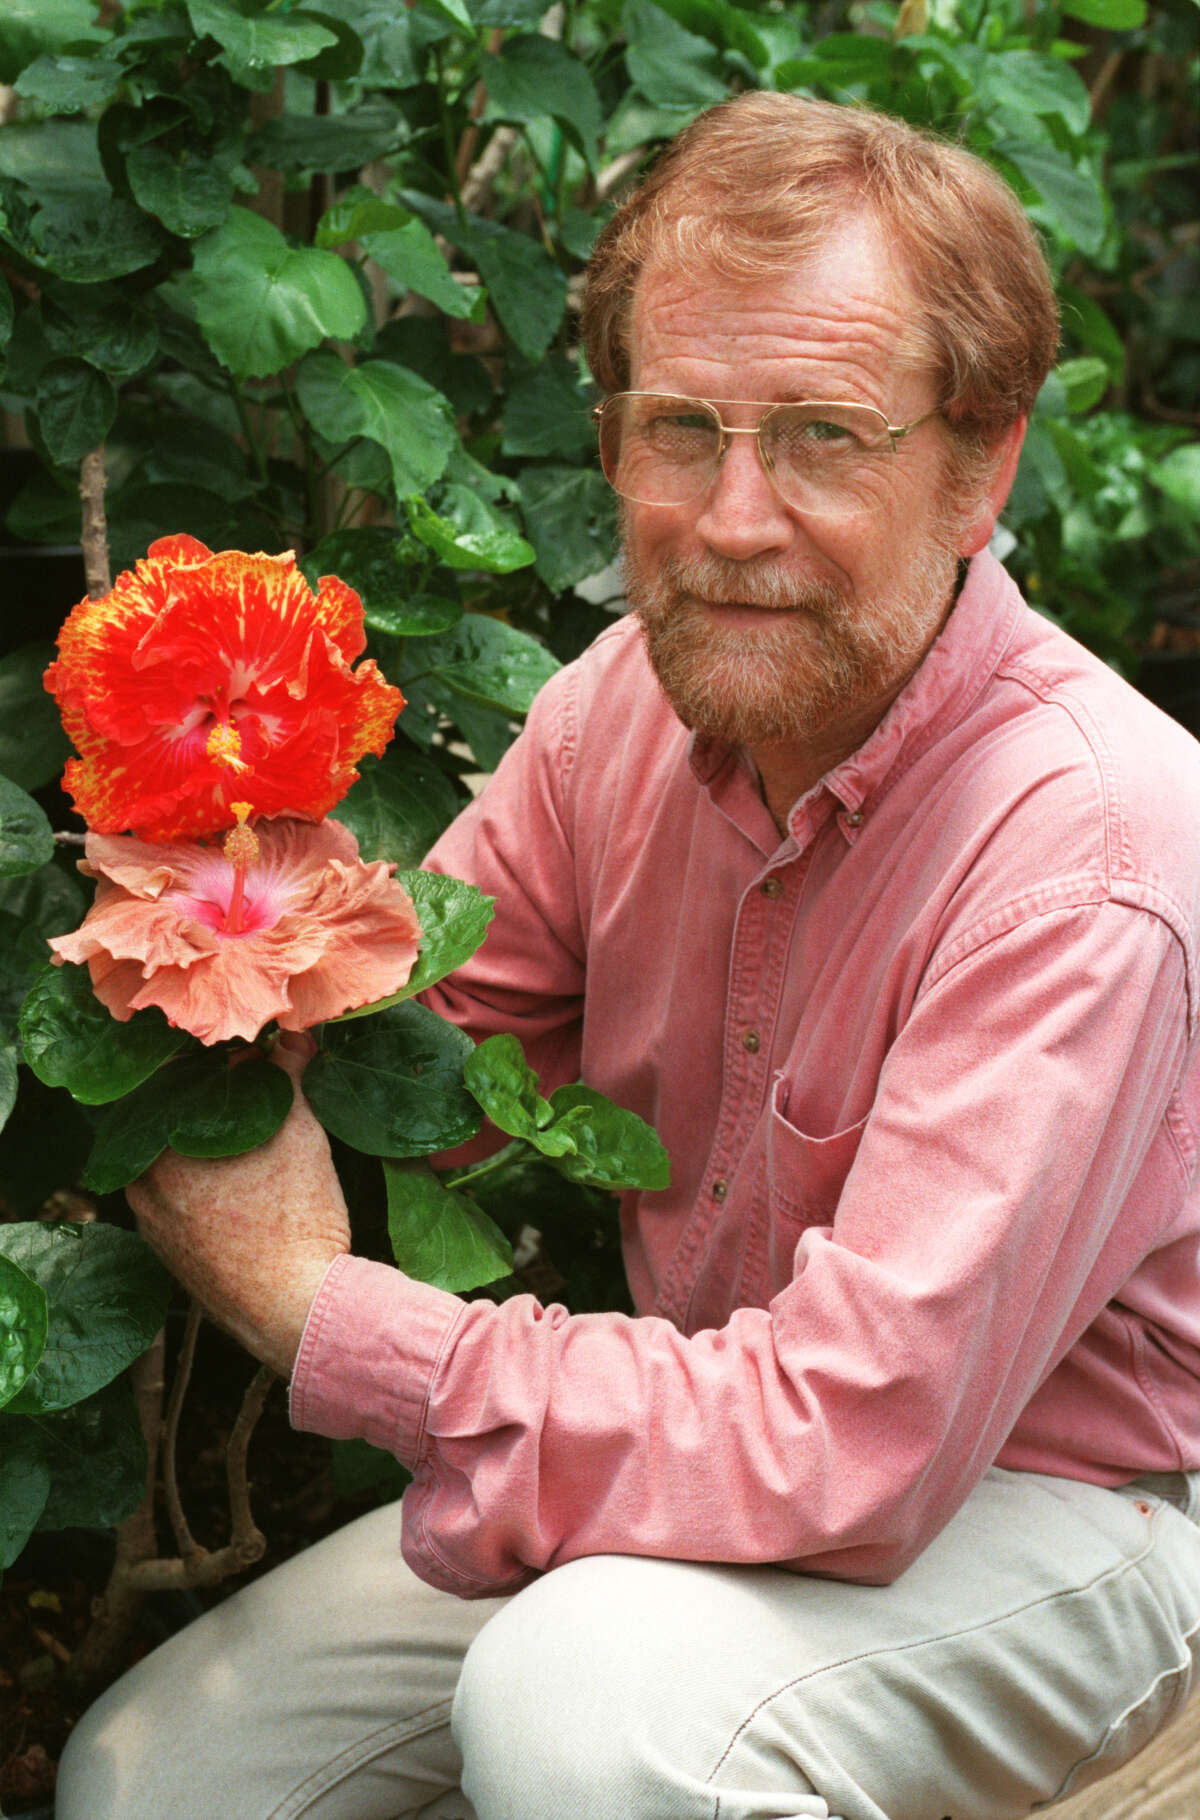 Hibiscus huybridizer Barry Schlueter was an avid gardener who also loved daylilies and roses. Chronicle file photo